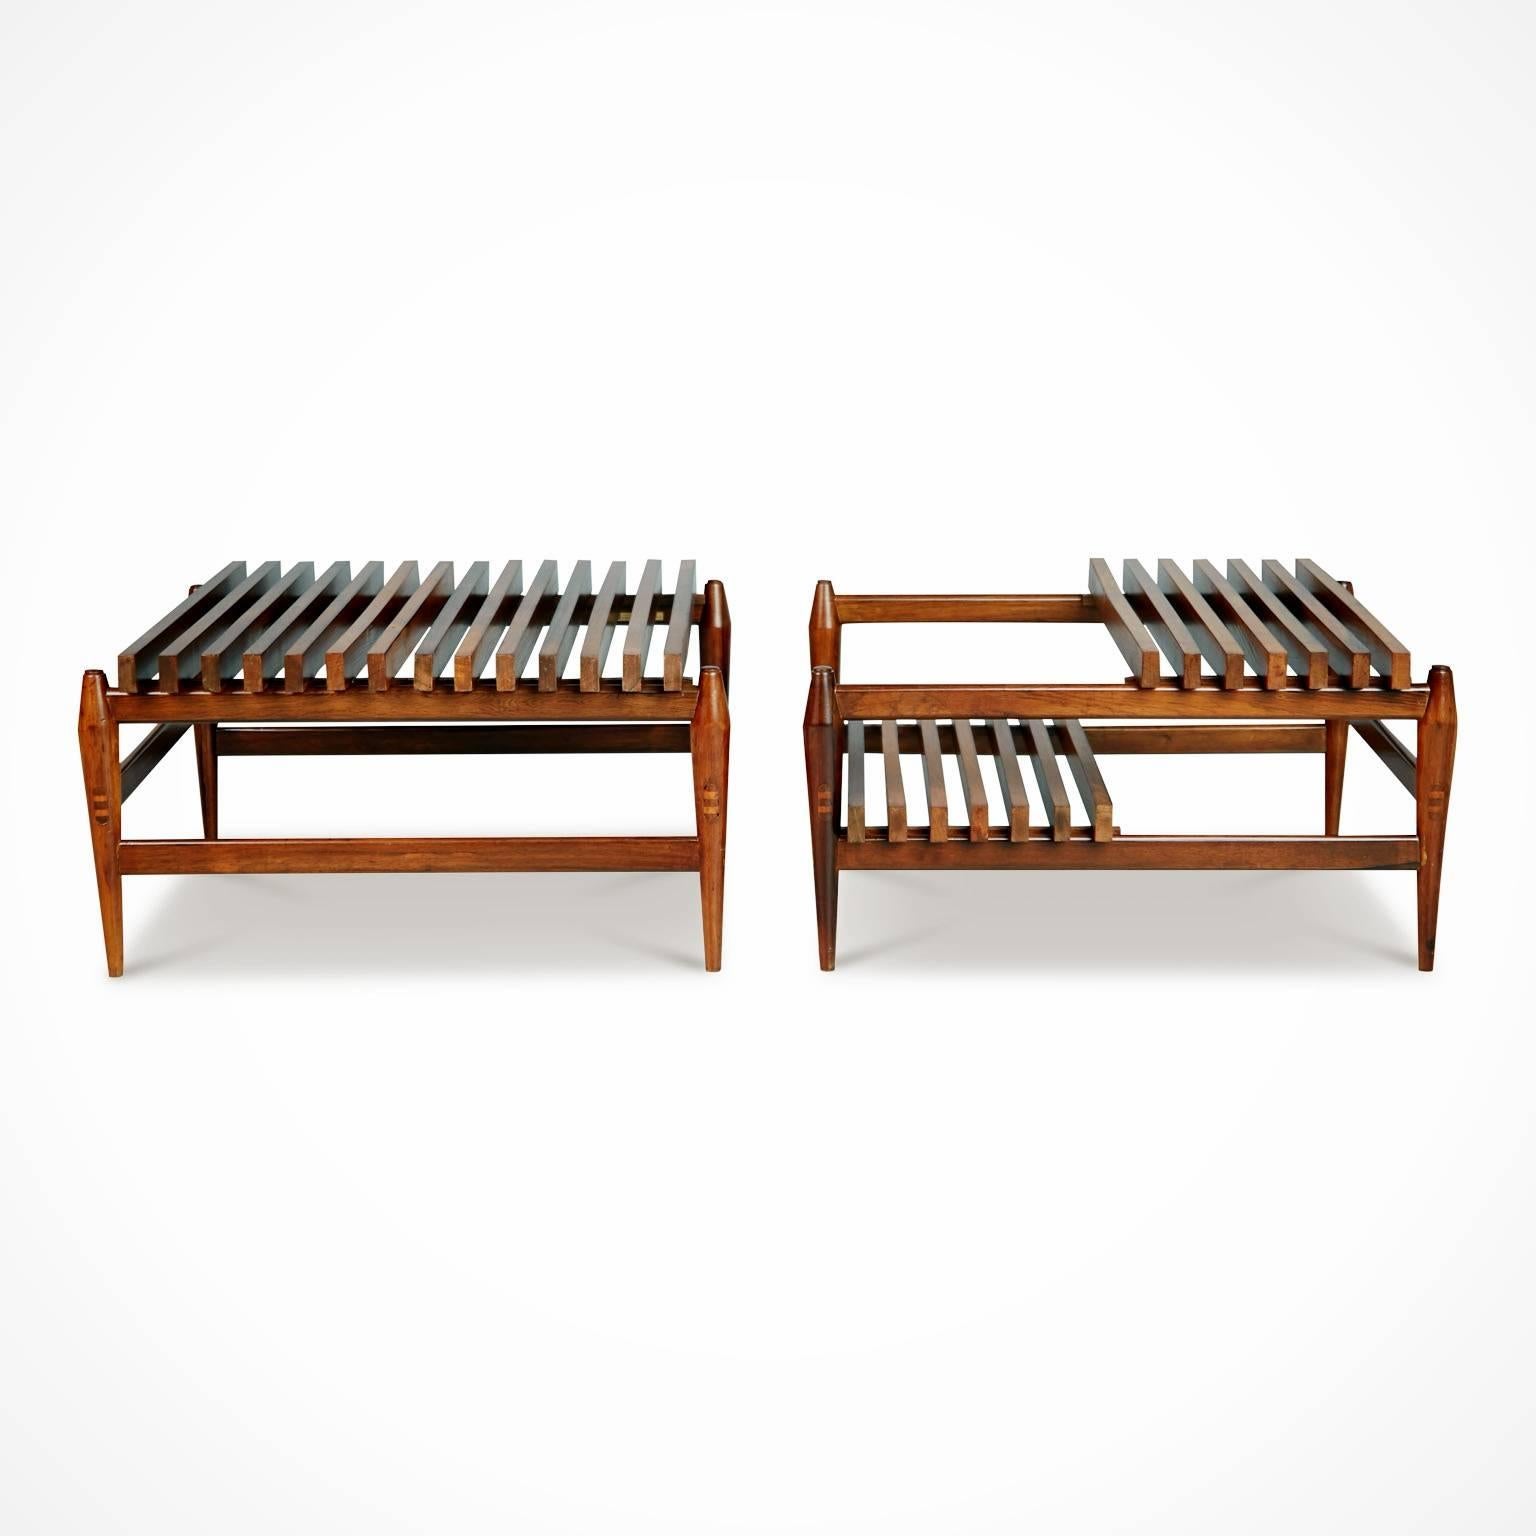 Newly imported and restored from a private collector in Brazil, these unique slatted Jacaranda Rosewood side tables created by the Liceu de Artes e Ofícios de São Paulo encapsulate the quality and innovation of the school's designs. 

Founded in